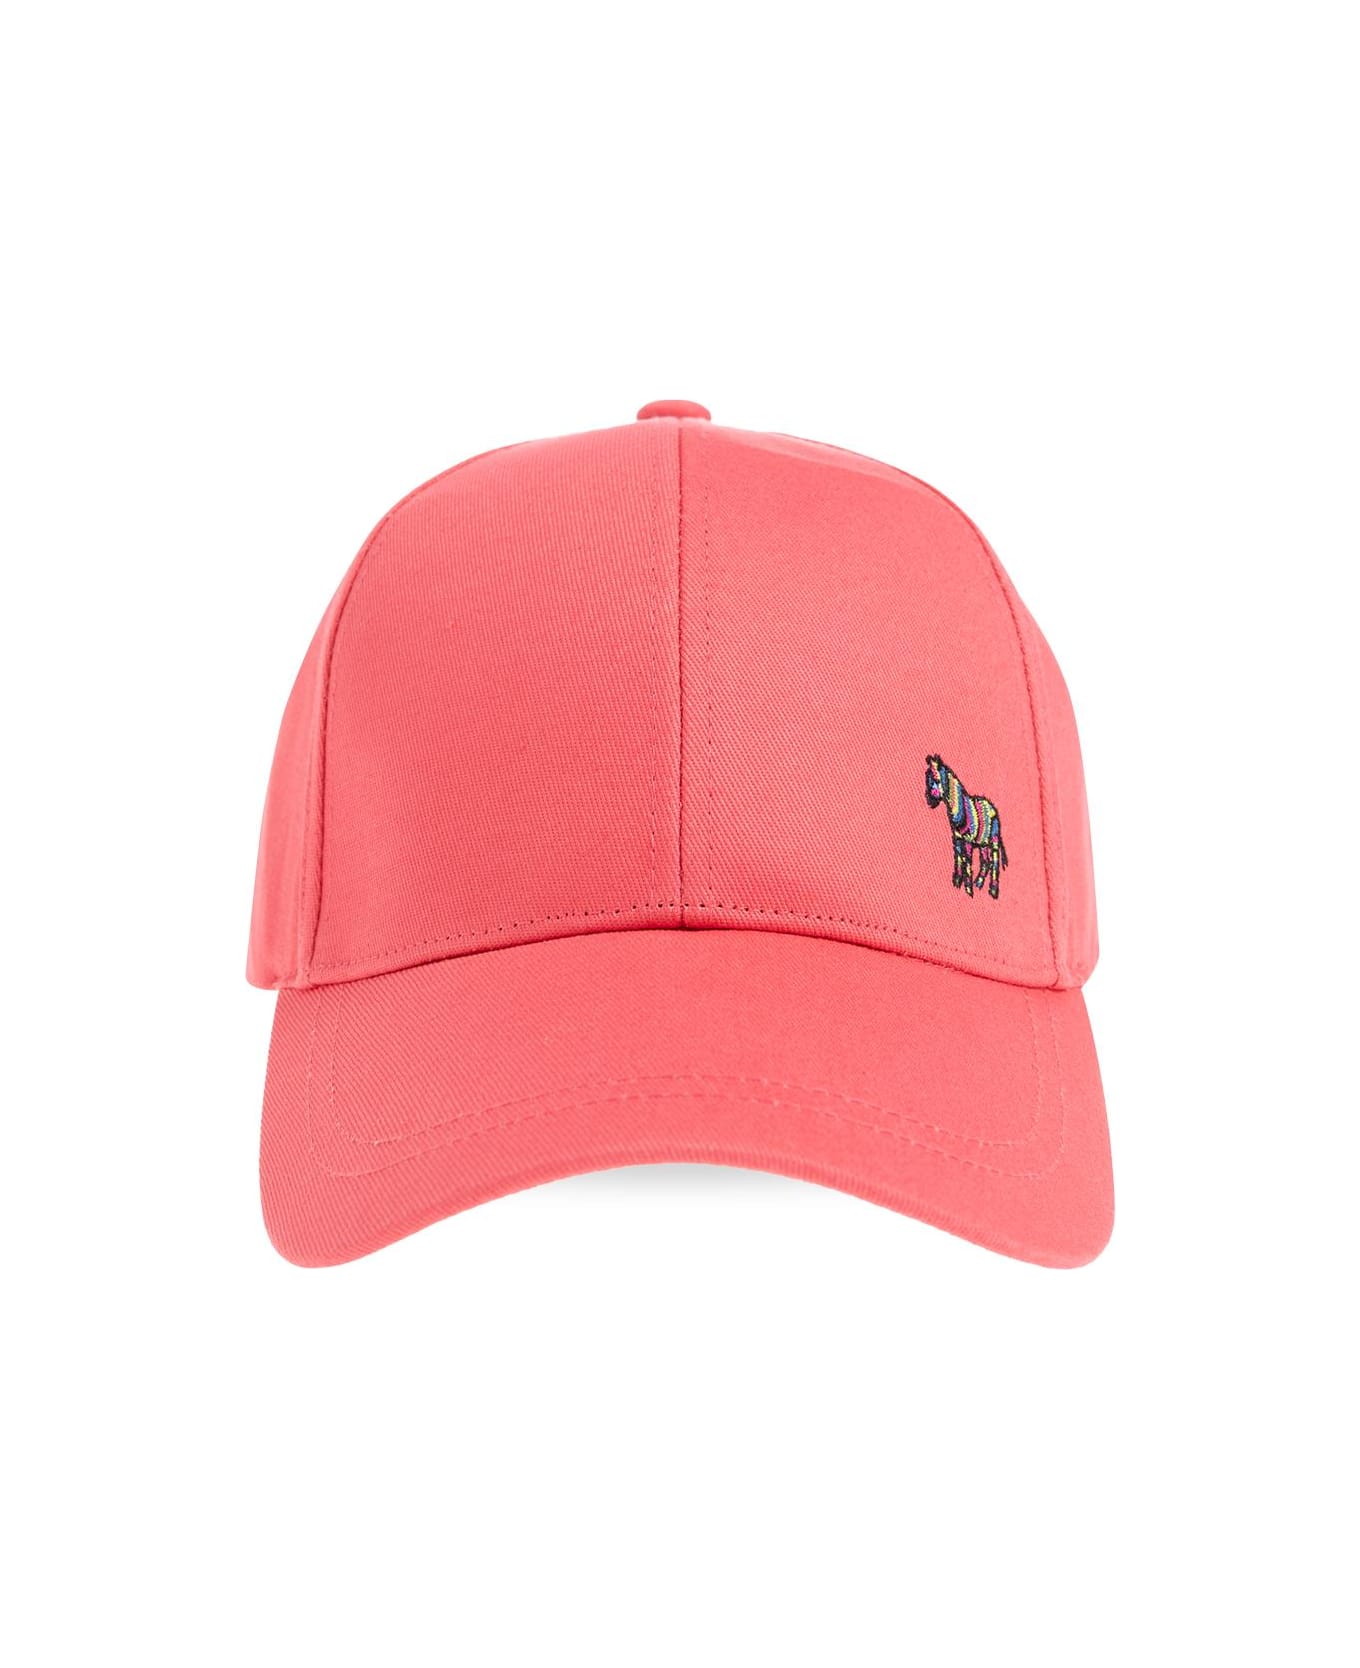 PS by Paul Smith Ps Paul Smith Baseball Cap With Patch - Pink 帽子